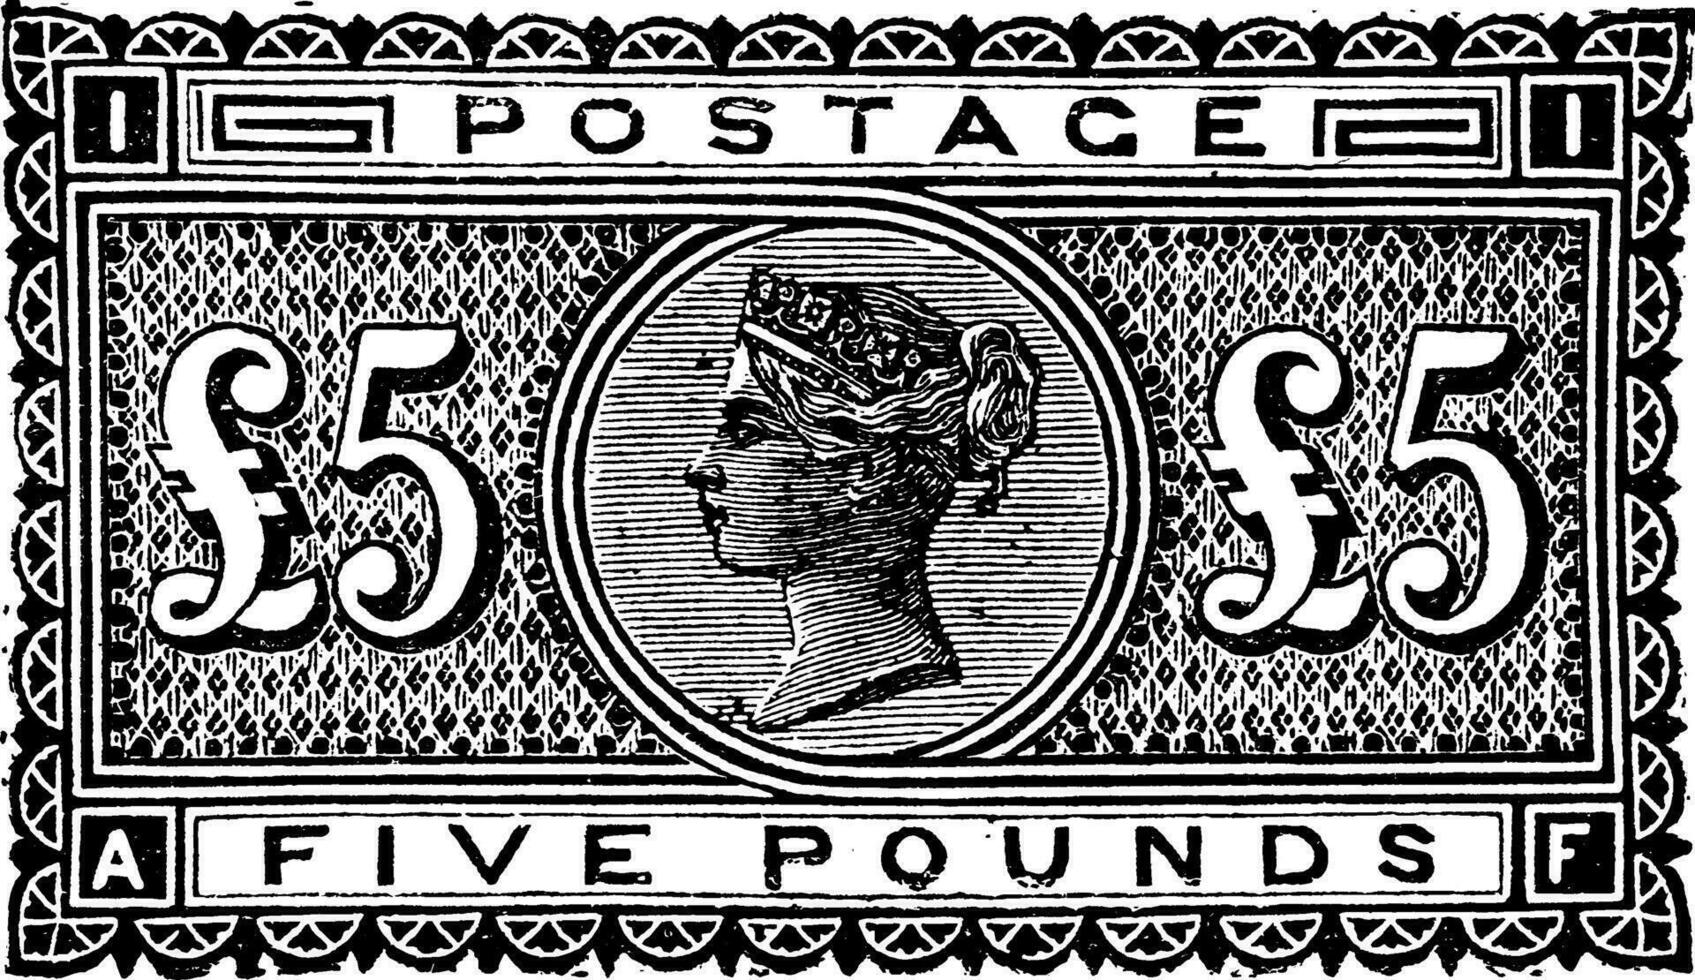 Great Britain and Ireland Five Pound Stamp in 1882, vintage illustration. vector